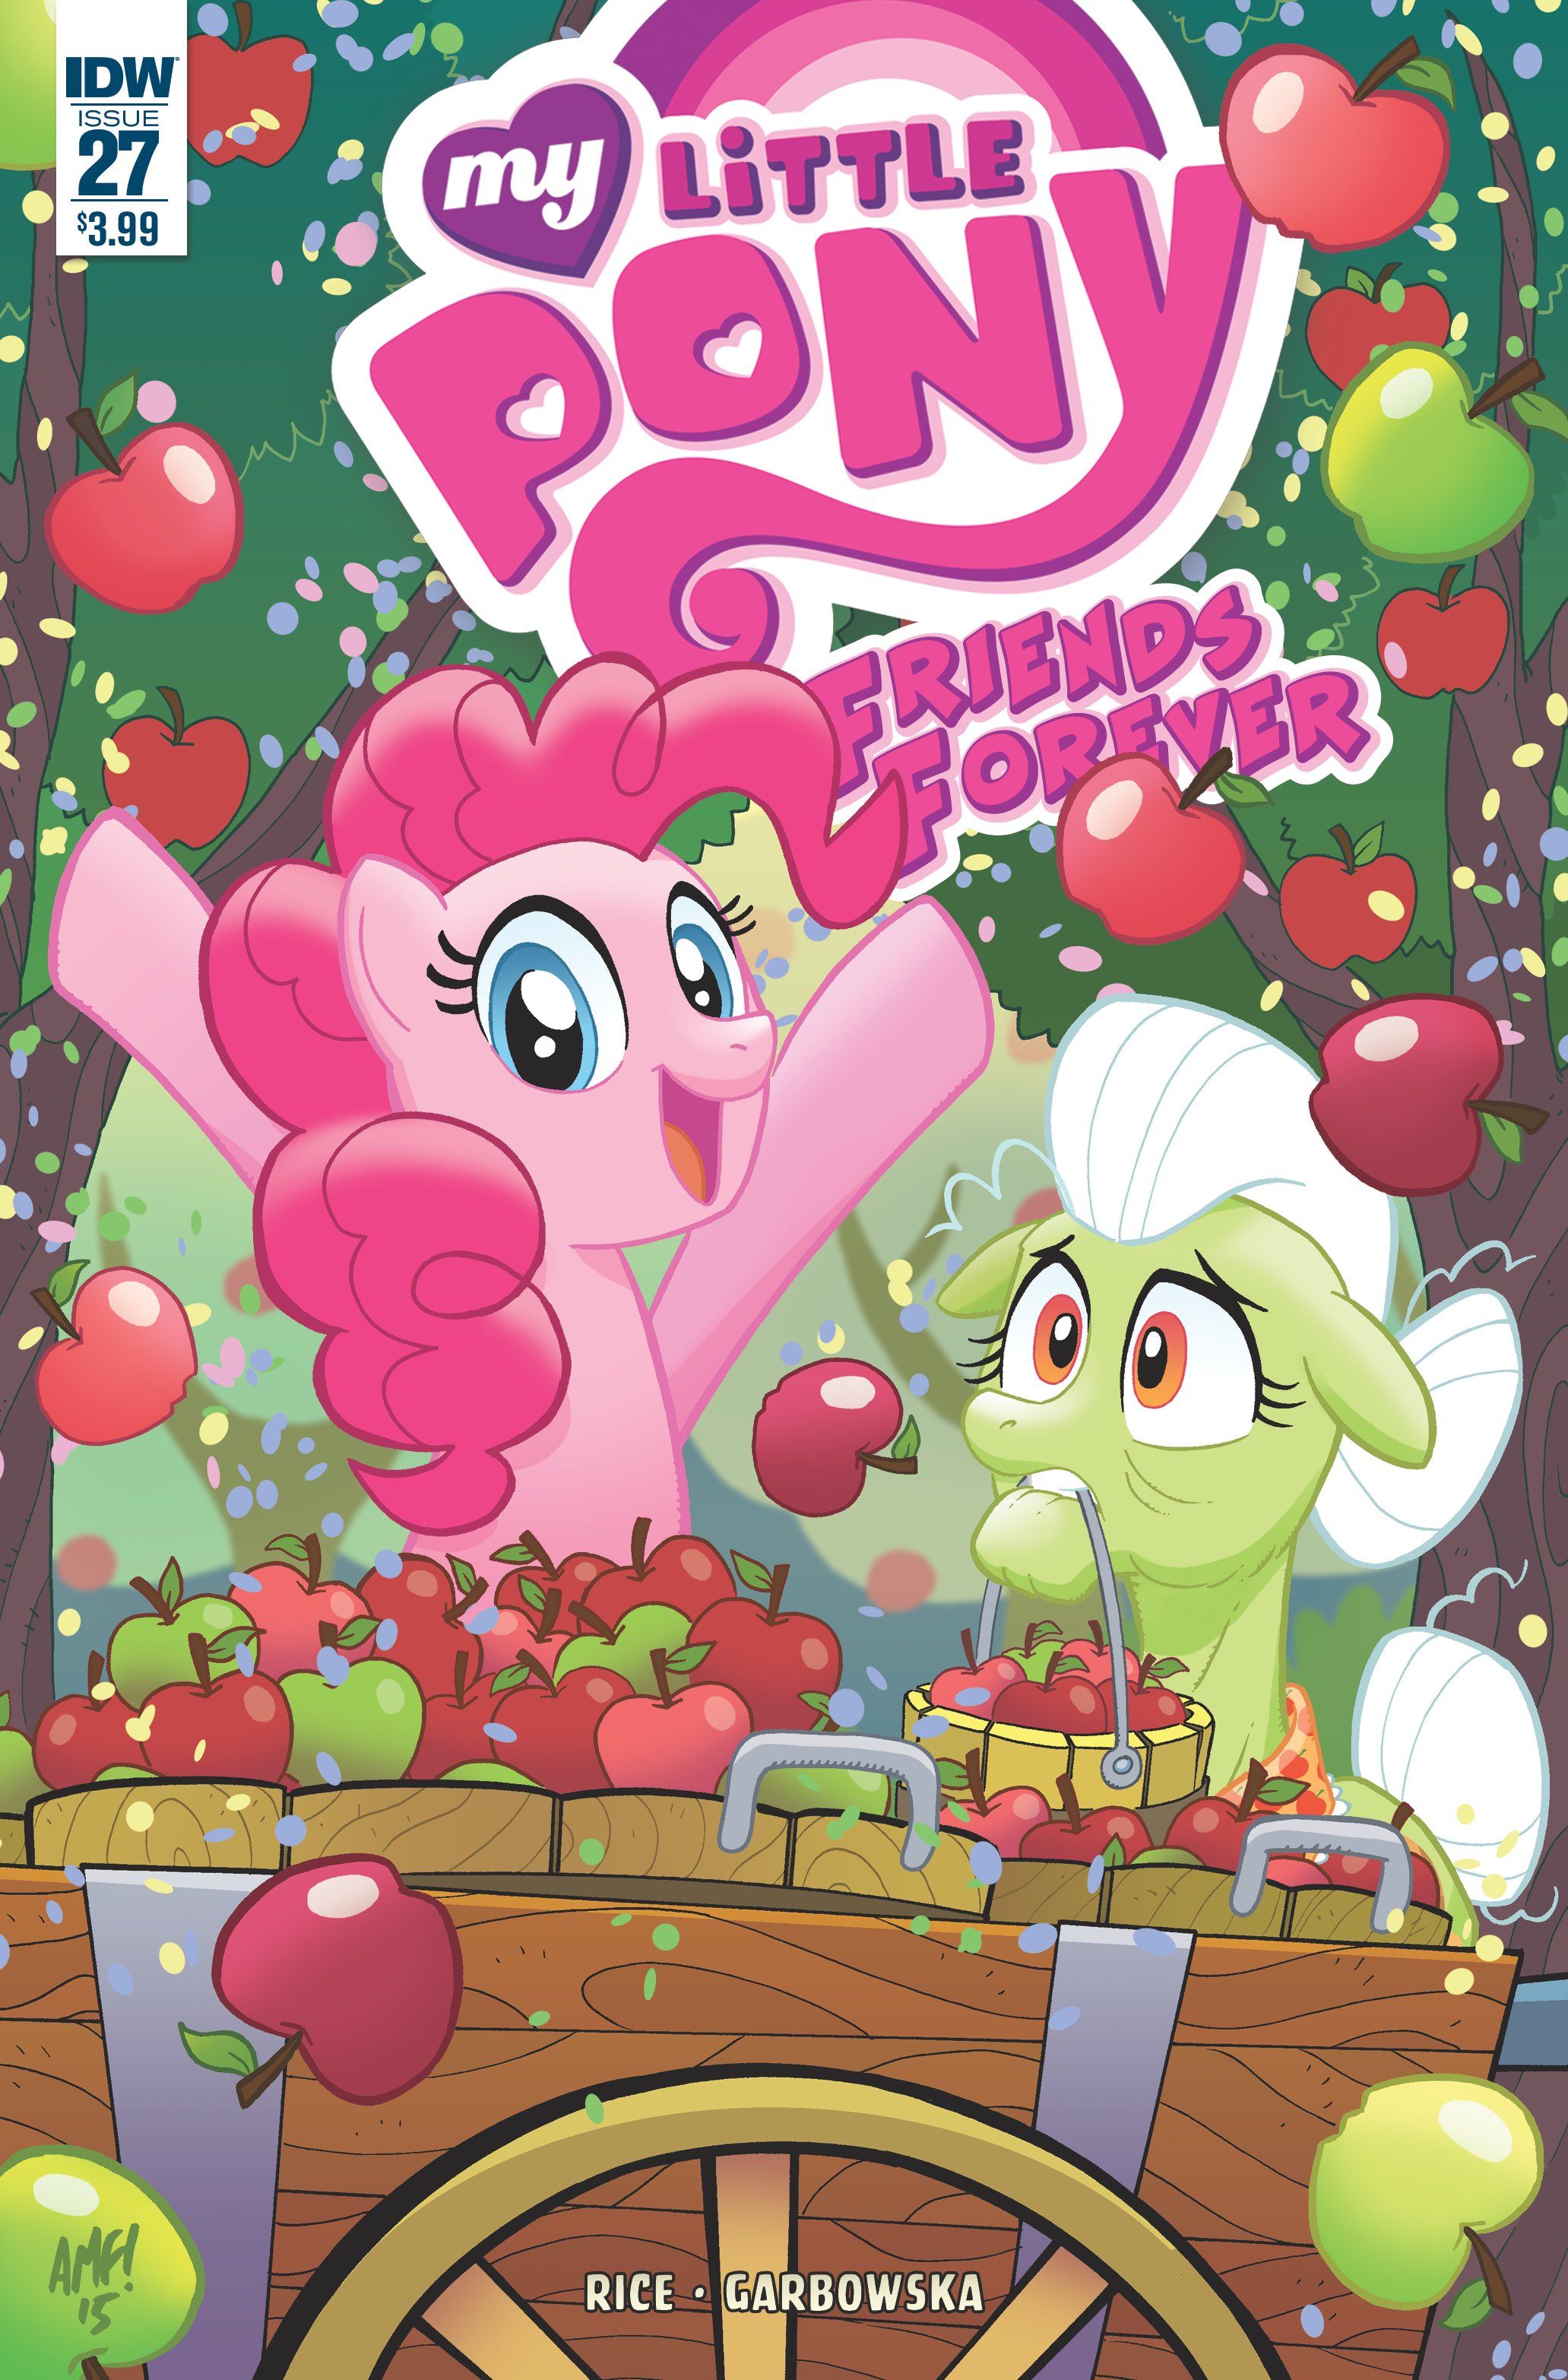 My Little Pony Friends Forever #27 Comic